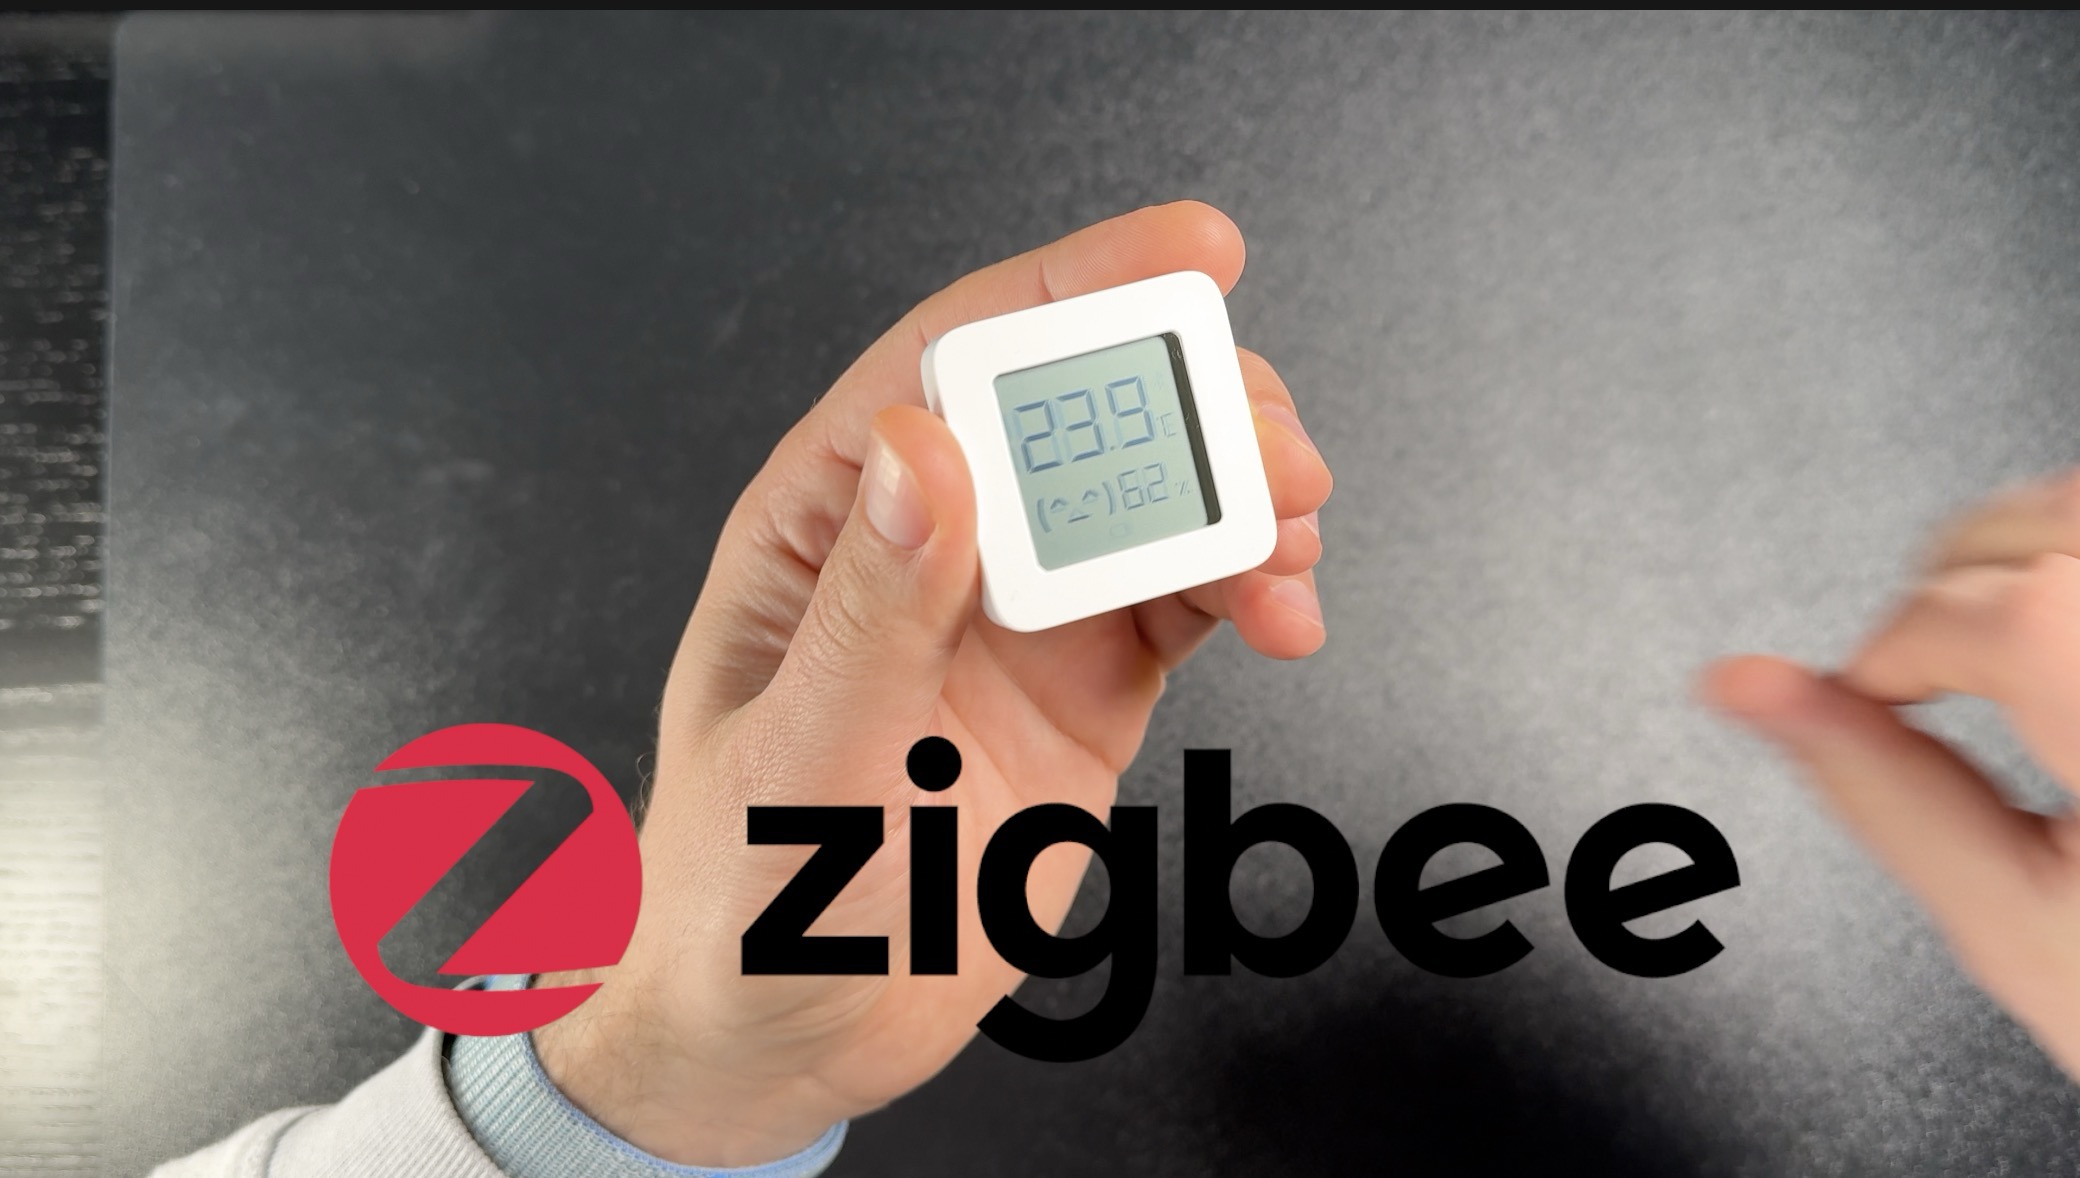 I will flash a custom Zigbee firmware on this sensor using only a browser